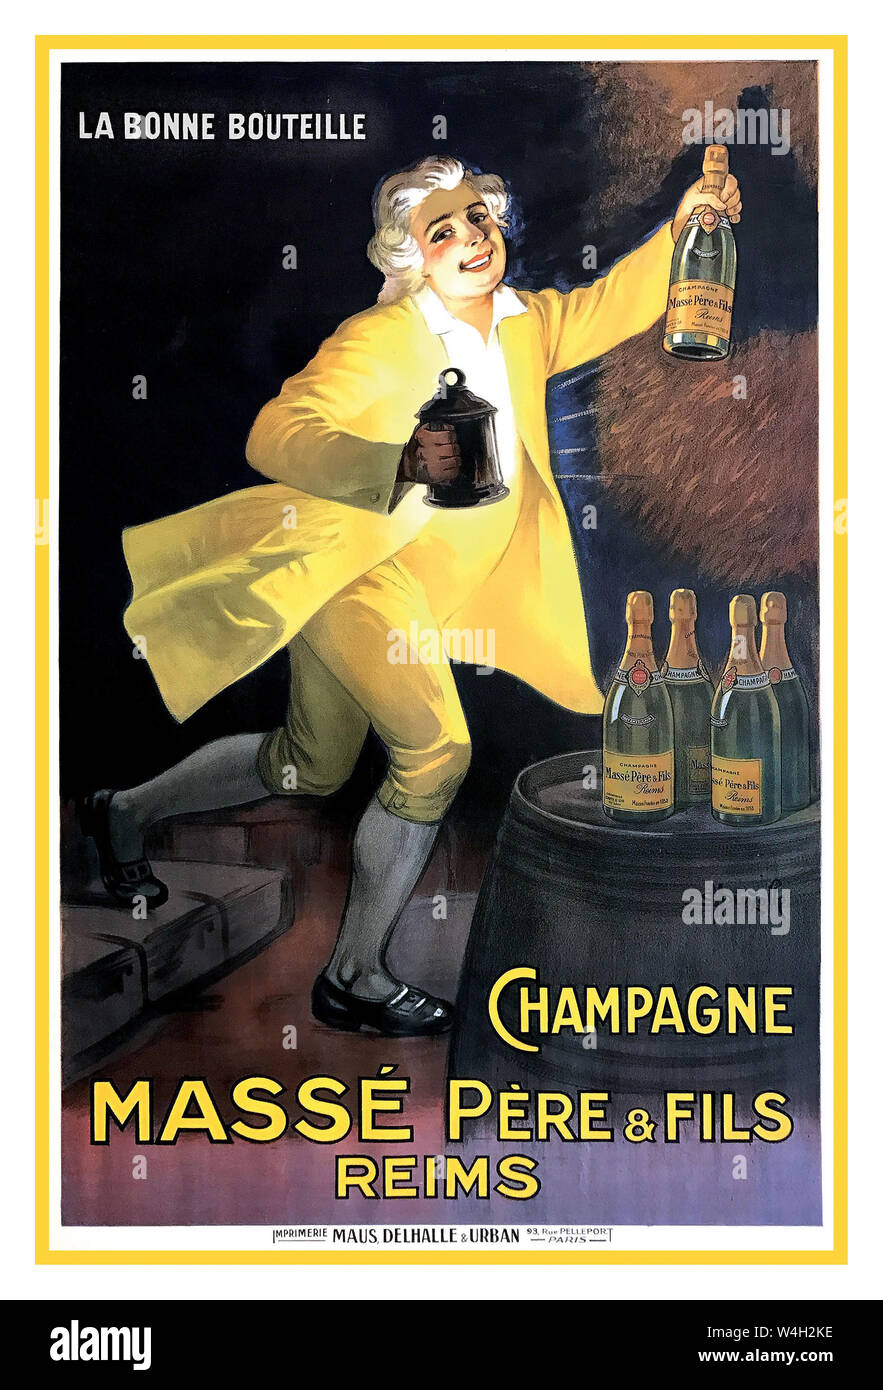 Vintage 1920's French Champagne drinks alcohol Poster by Auzolle Marcellin (1862-1942), CHAMPAGNE MASSE’ PERE ET FILS, REIMS First edition period 17th C person fashion lithographic poster 1925 France Stock Photo